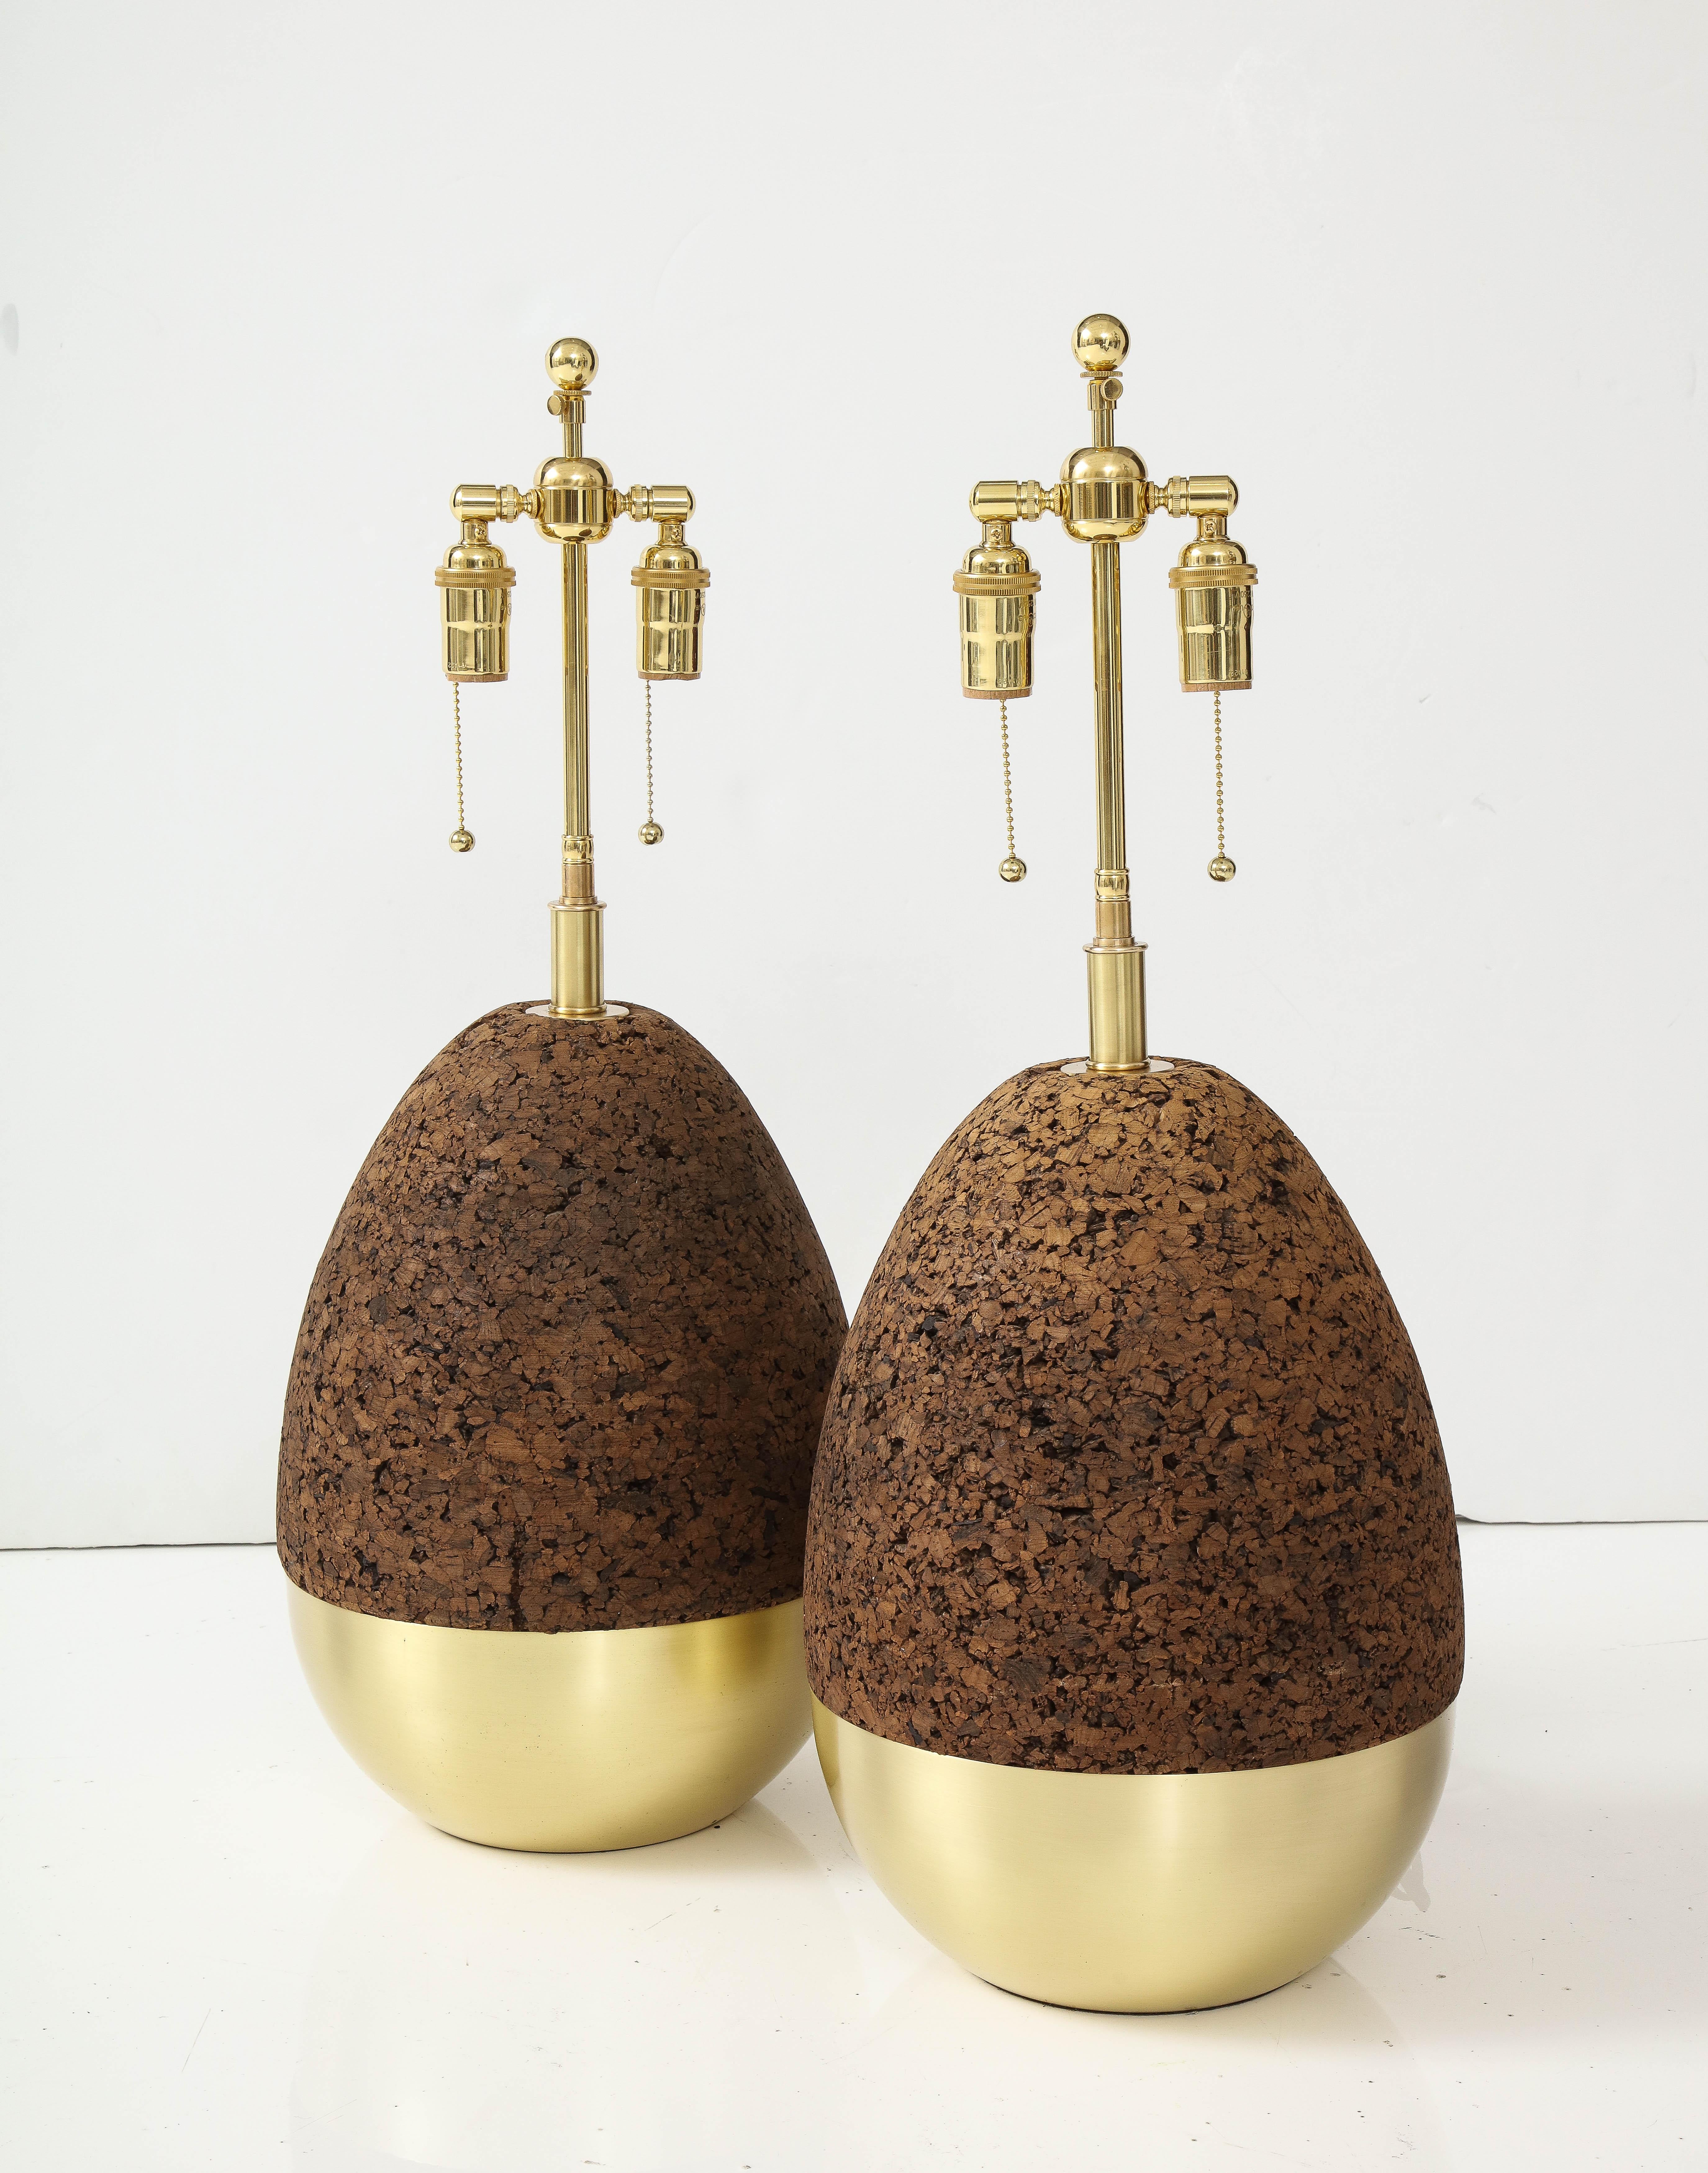 Pair of midcentury 1970s Egg shaped brass and cork table lamps.
The lamps have been Newly rewired with adjustable polished brass double clusters that take standard Size light bulbs and silk rayon cords.
The height to the top of the finial is 28.5